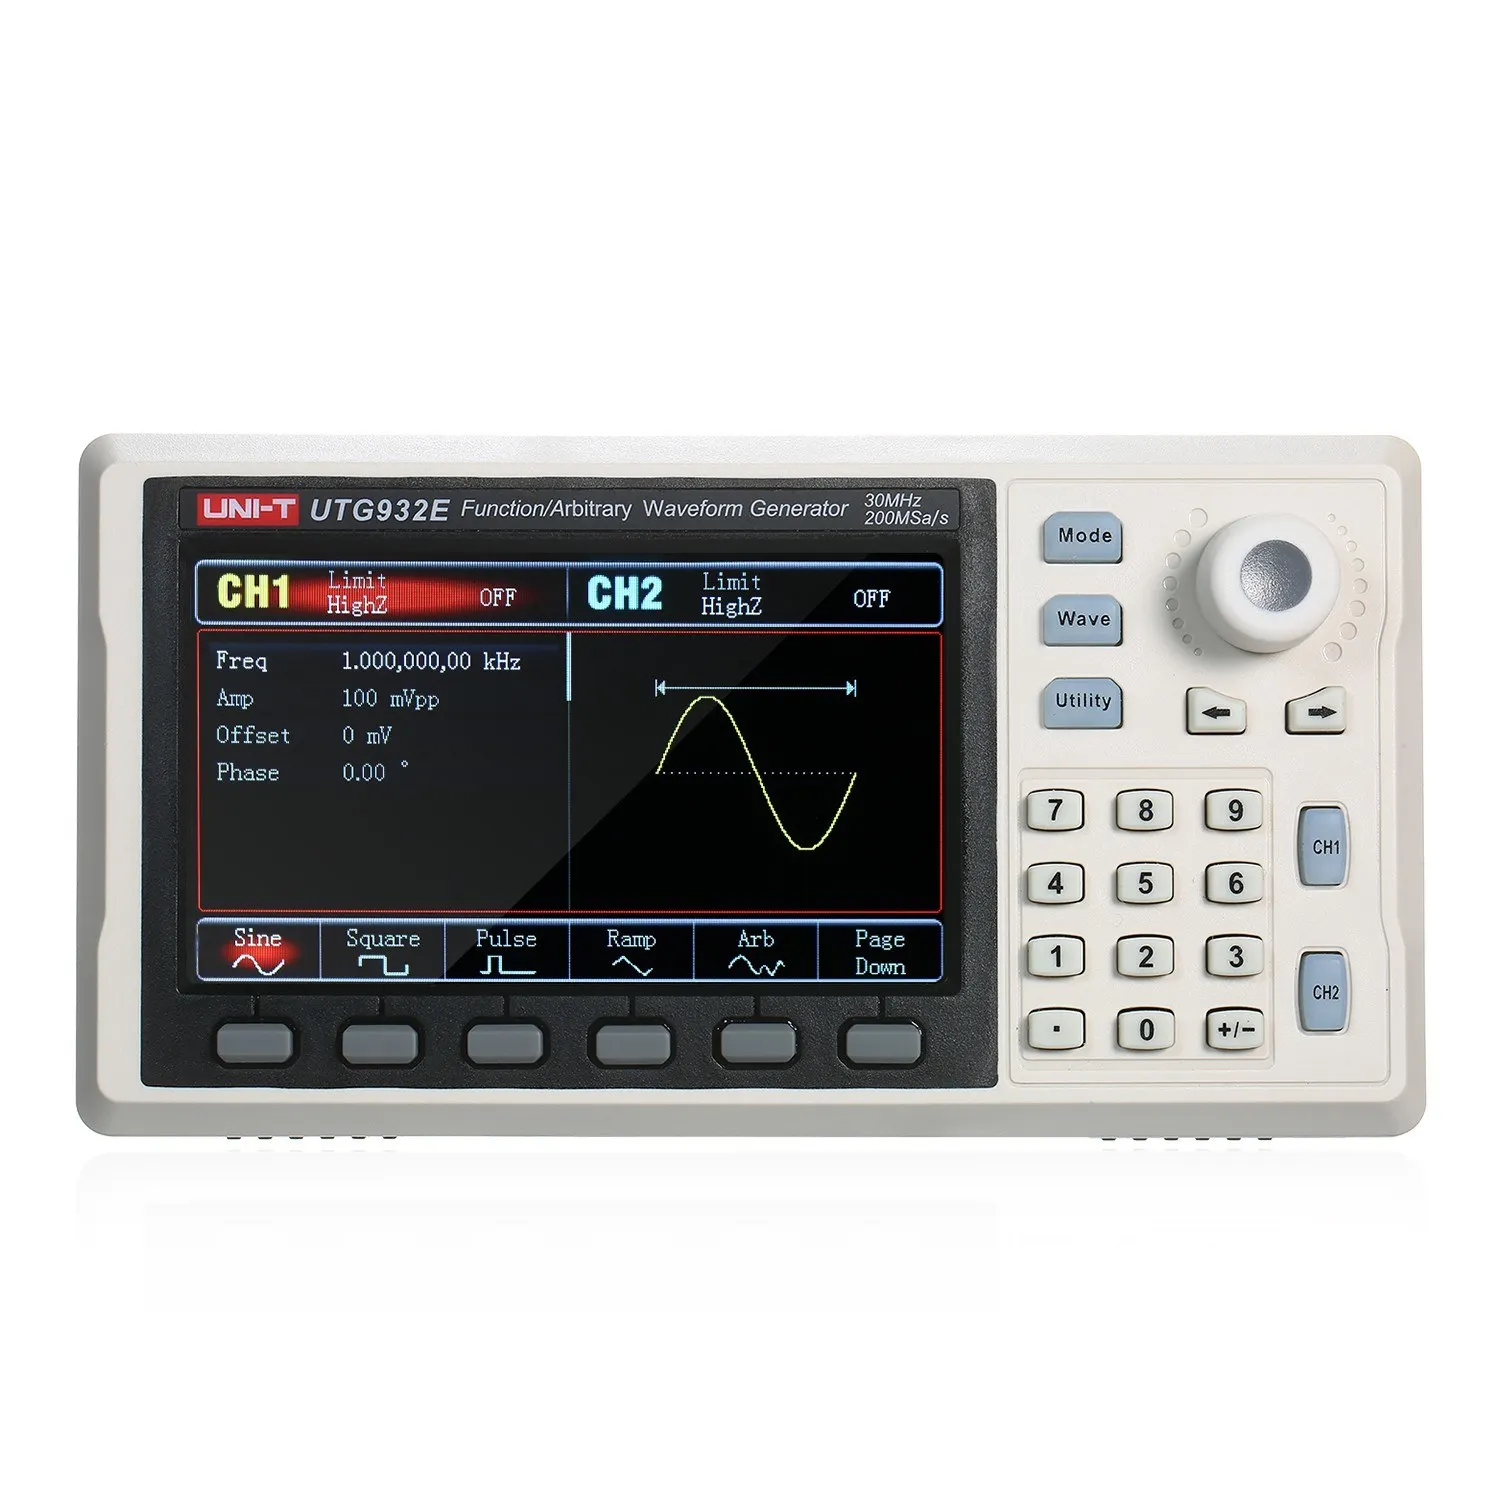 Function/Arbitrary Waveform Generator 30MHz DDS 200MSa/s Frequency Meter Q0B4 